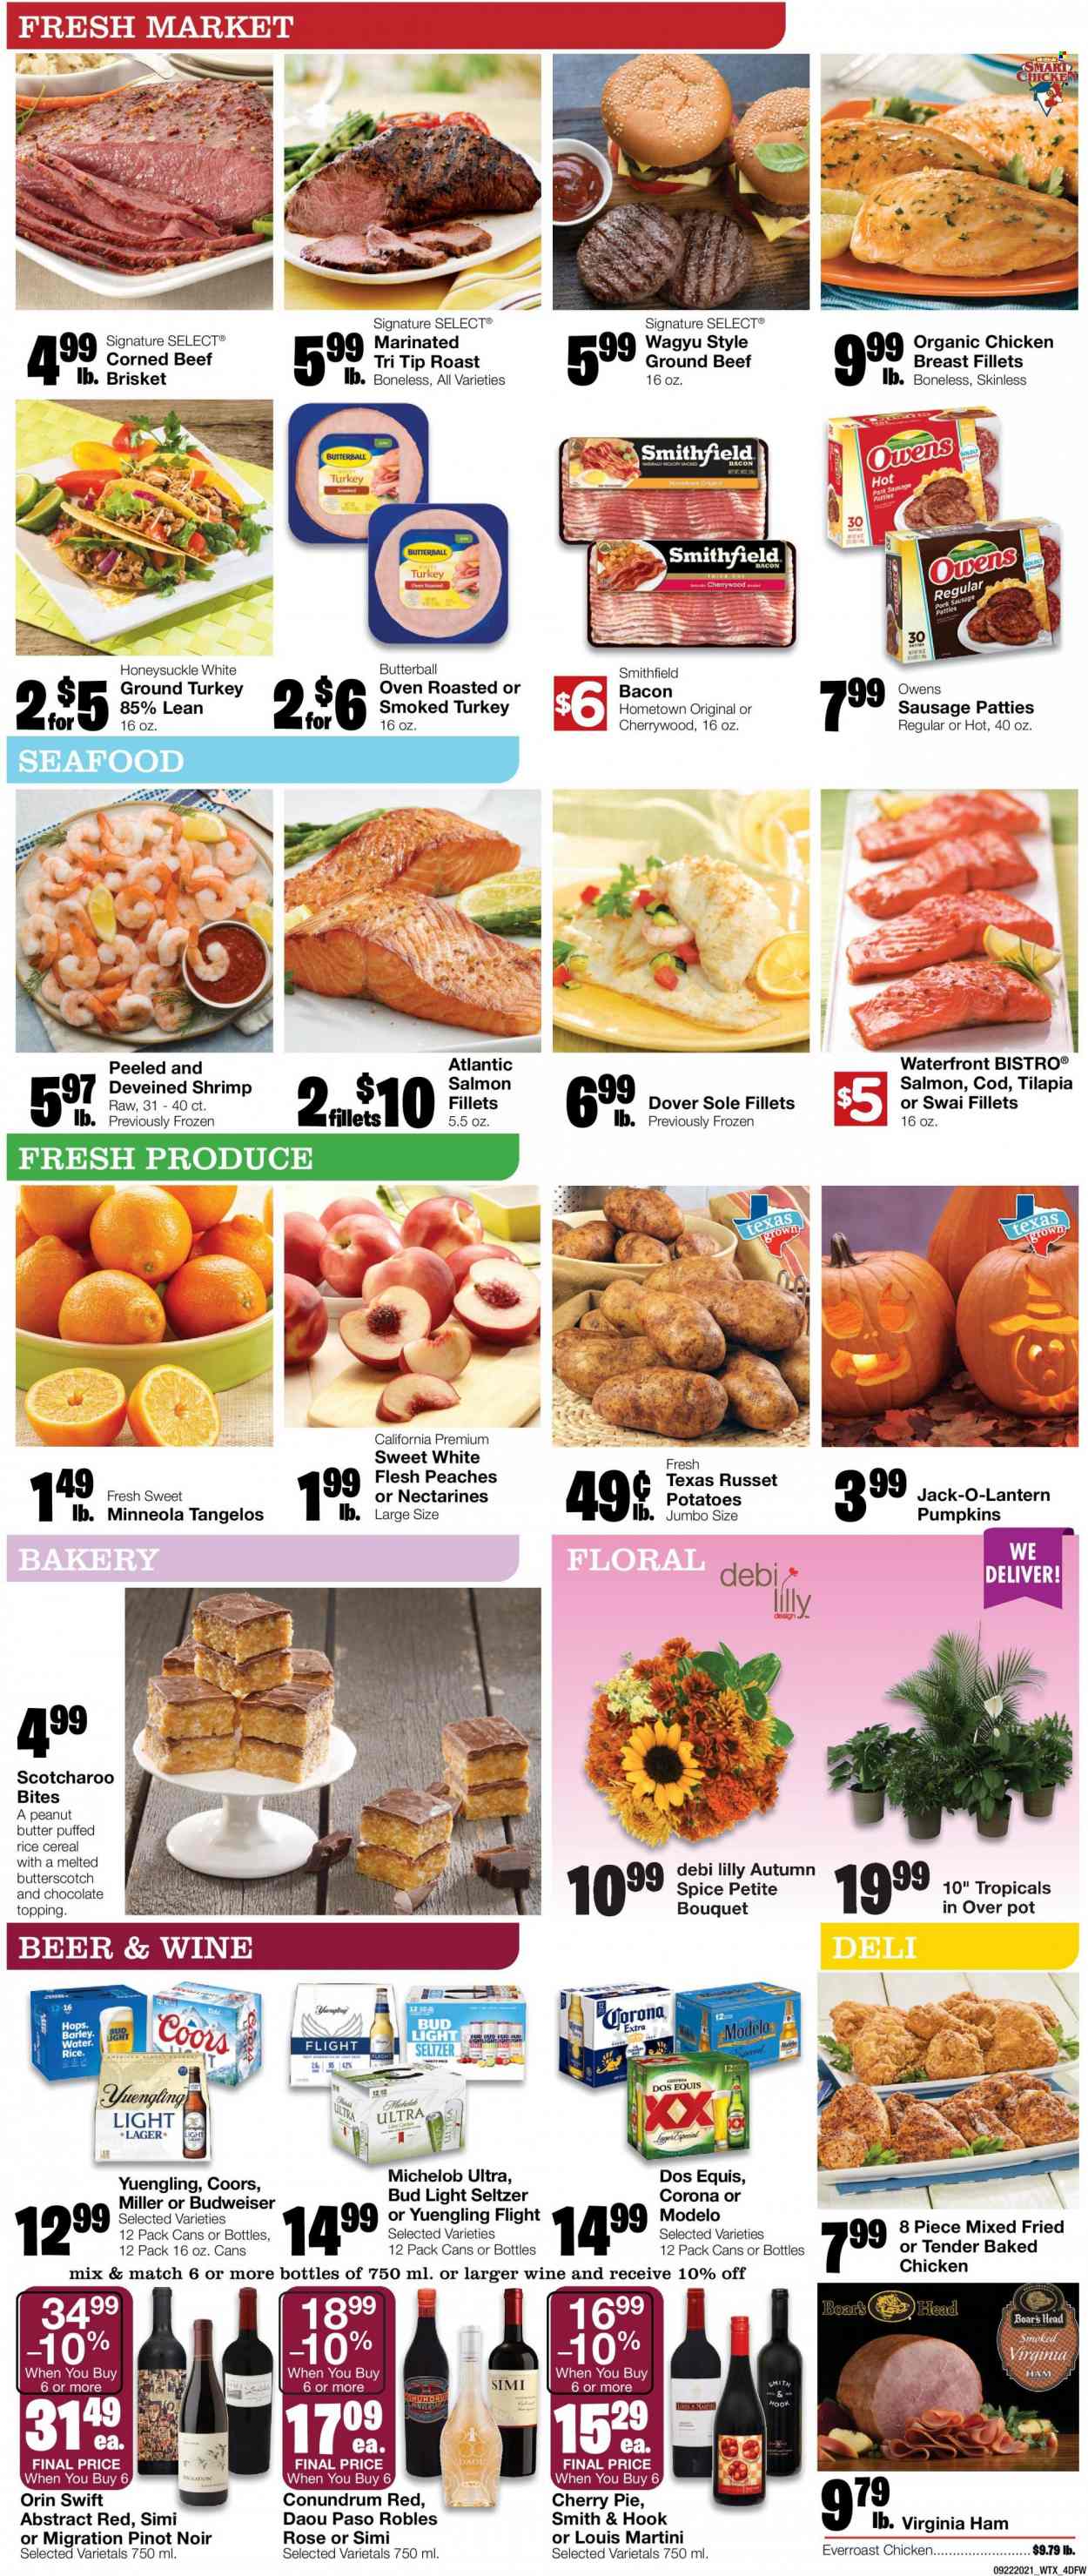 thumbnail - Market Street Flyer - 09/22/2021 - 09/28/2021 - Sales products - tangelos, pie, cherry pie, russet potatoes, potatoes, pumpkin, cod, salmon, salmon fillet, tilapia, seafood, shrimps, swai fillet, bacon, Butterball, turkey bacon, ham, virginia ham, sausage, pork sausage, corned beef, butterscotch, topping, cereals, spice, peanut butter, Illy, red wine, wine, Pinot Noir, rosé wine, Hard Seltzer, beer, Bud Light, Corona Extra, Miller, Lager, Modelo, ground turkey, chicken breasts, beef meat, ground beef, pot, lantern, bouquet, Budweiser, nectarines, Coors, Dos Equis, Yuengling, Michelob, peaches. Page 4.